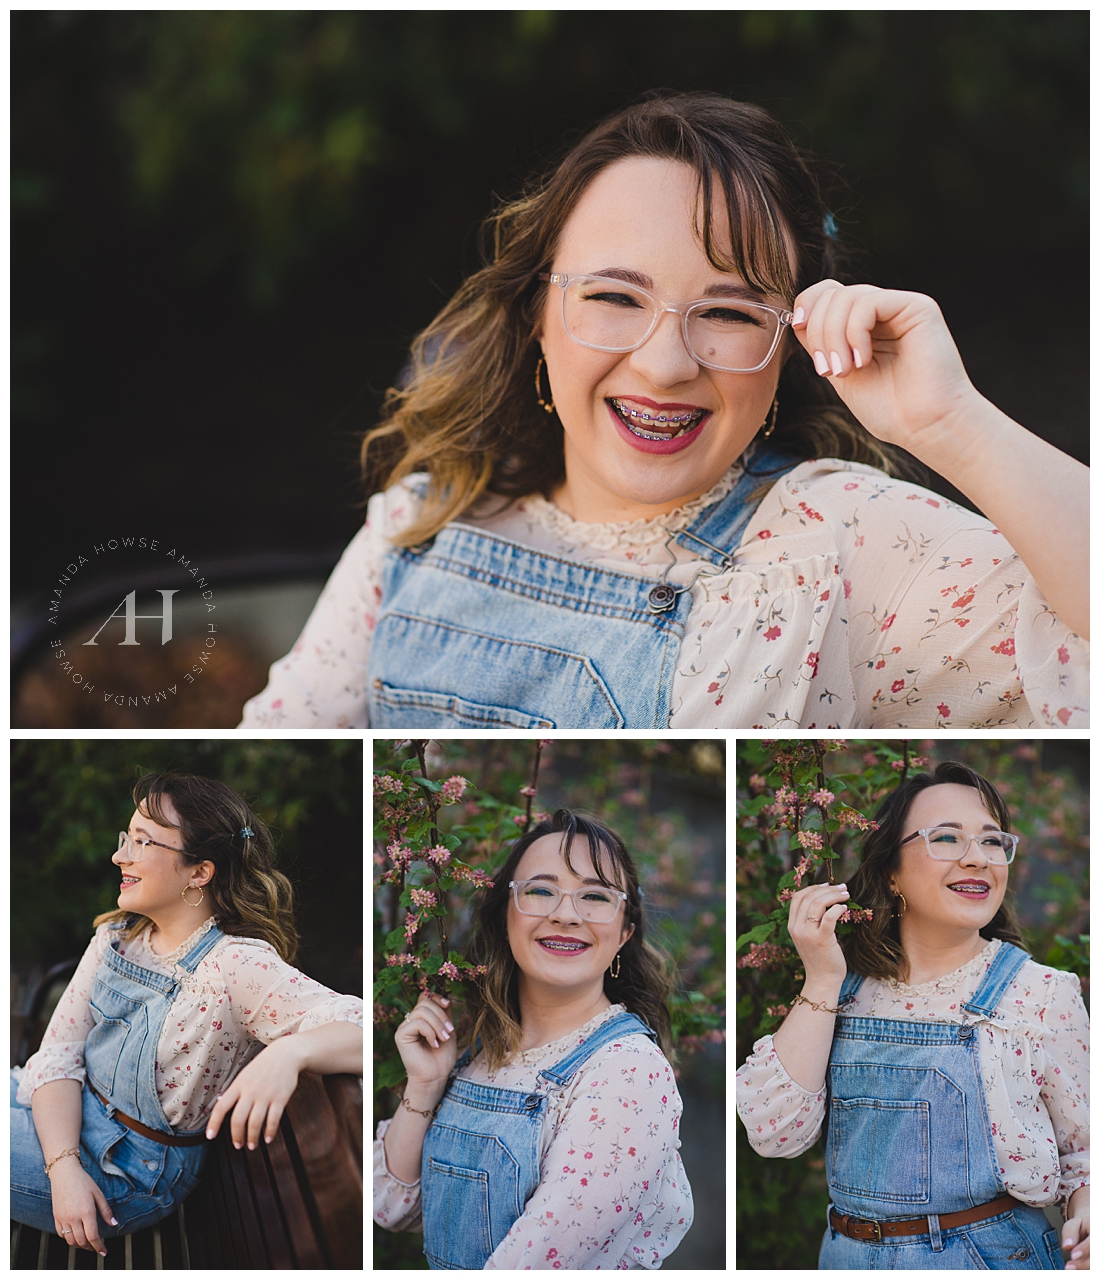 Candid Senior Portraits | Pose Ideas for High School Seniors, Spring Outfit Ideas, Cute Senior Portraits | Photographed by the Best Tacoma Senior Photographer Amanda Howse Photography